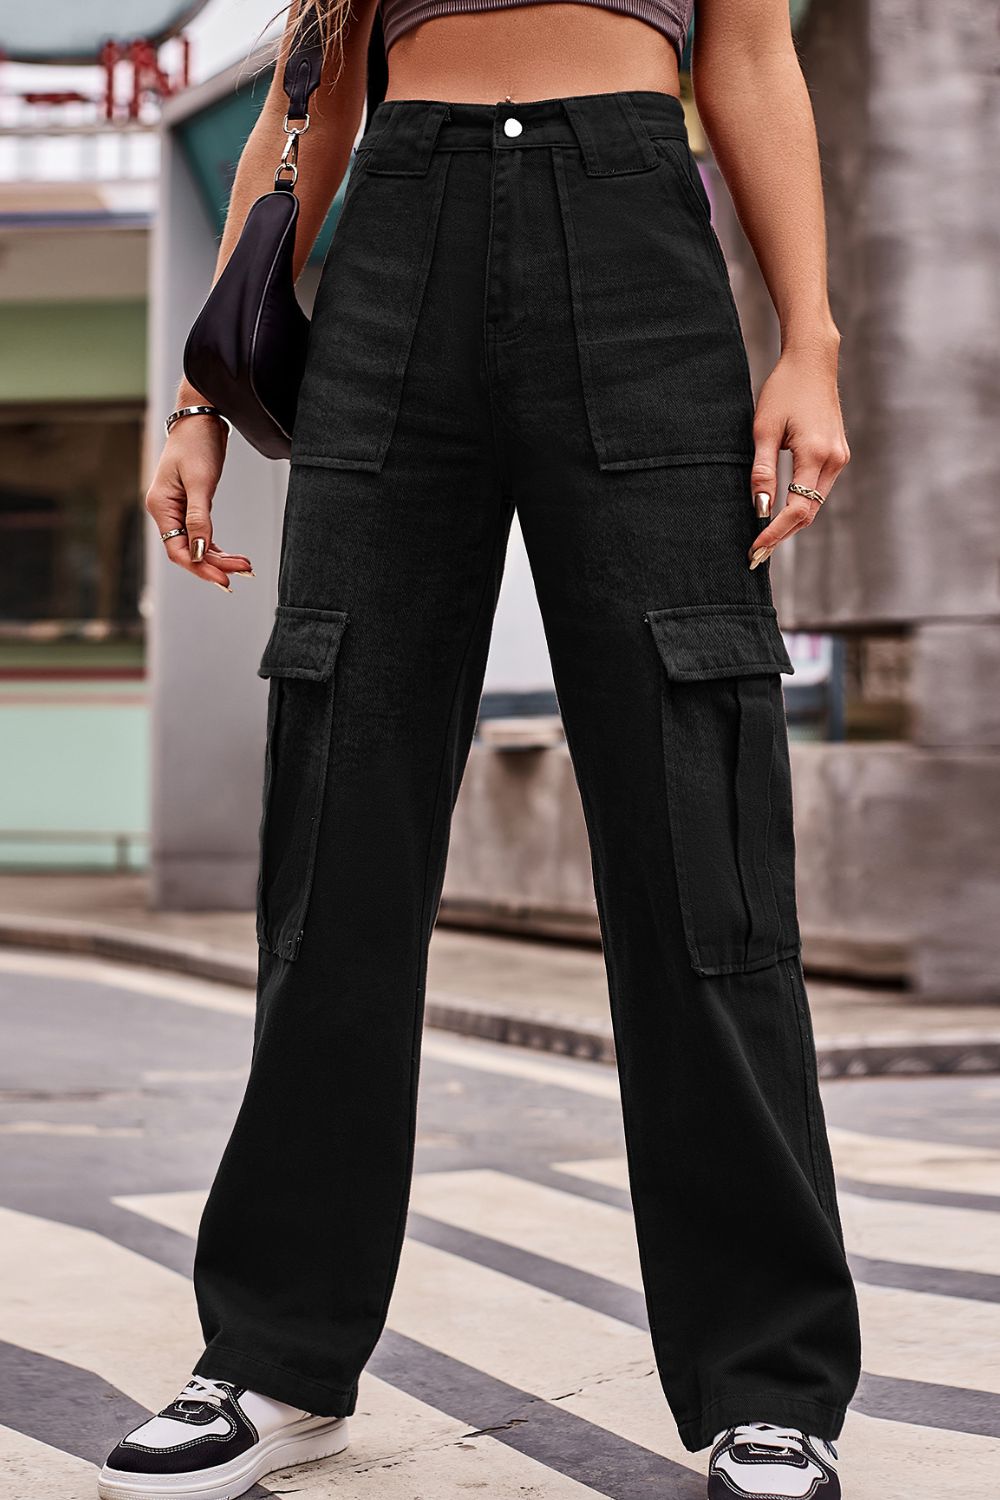 Buttoned High Waist Loose Fit Jeans - Jeans - FITGGINS